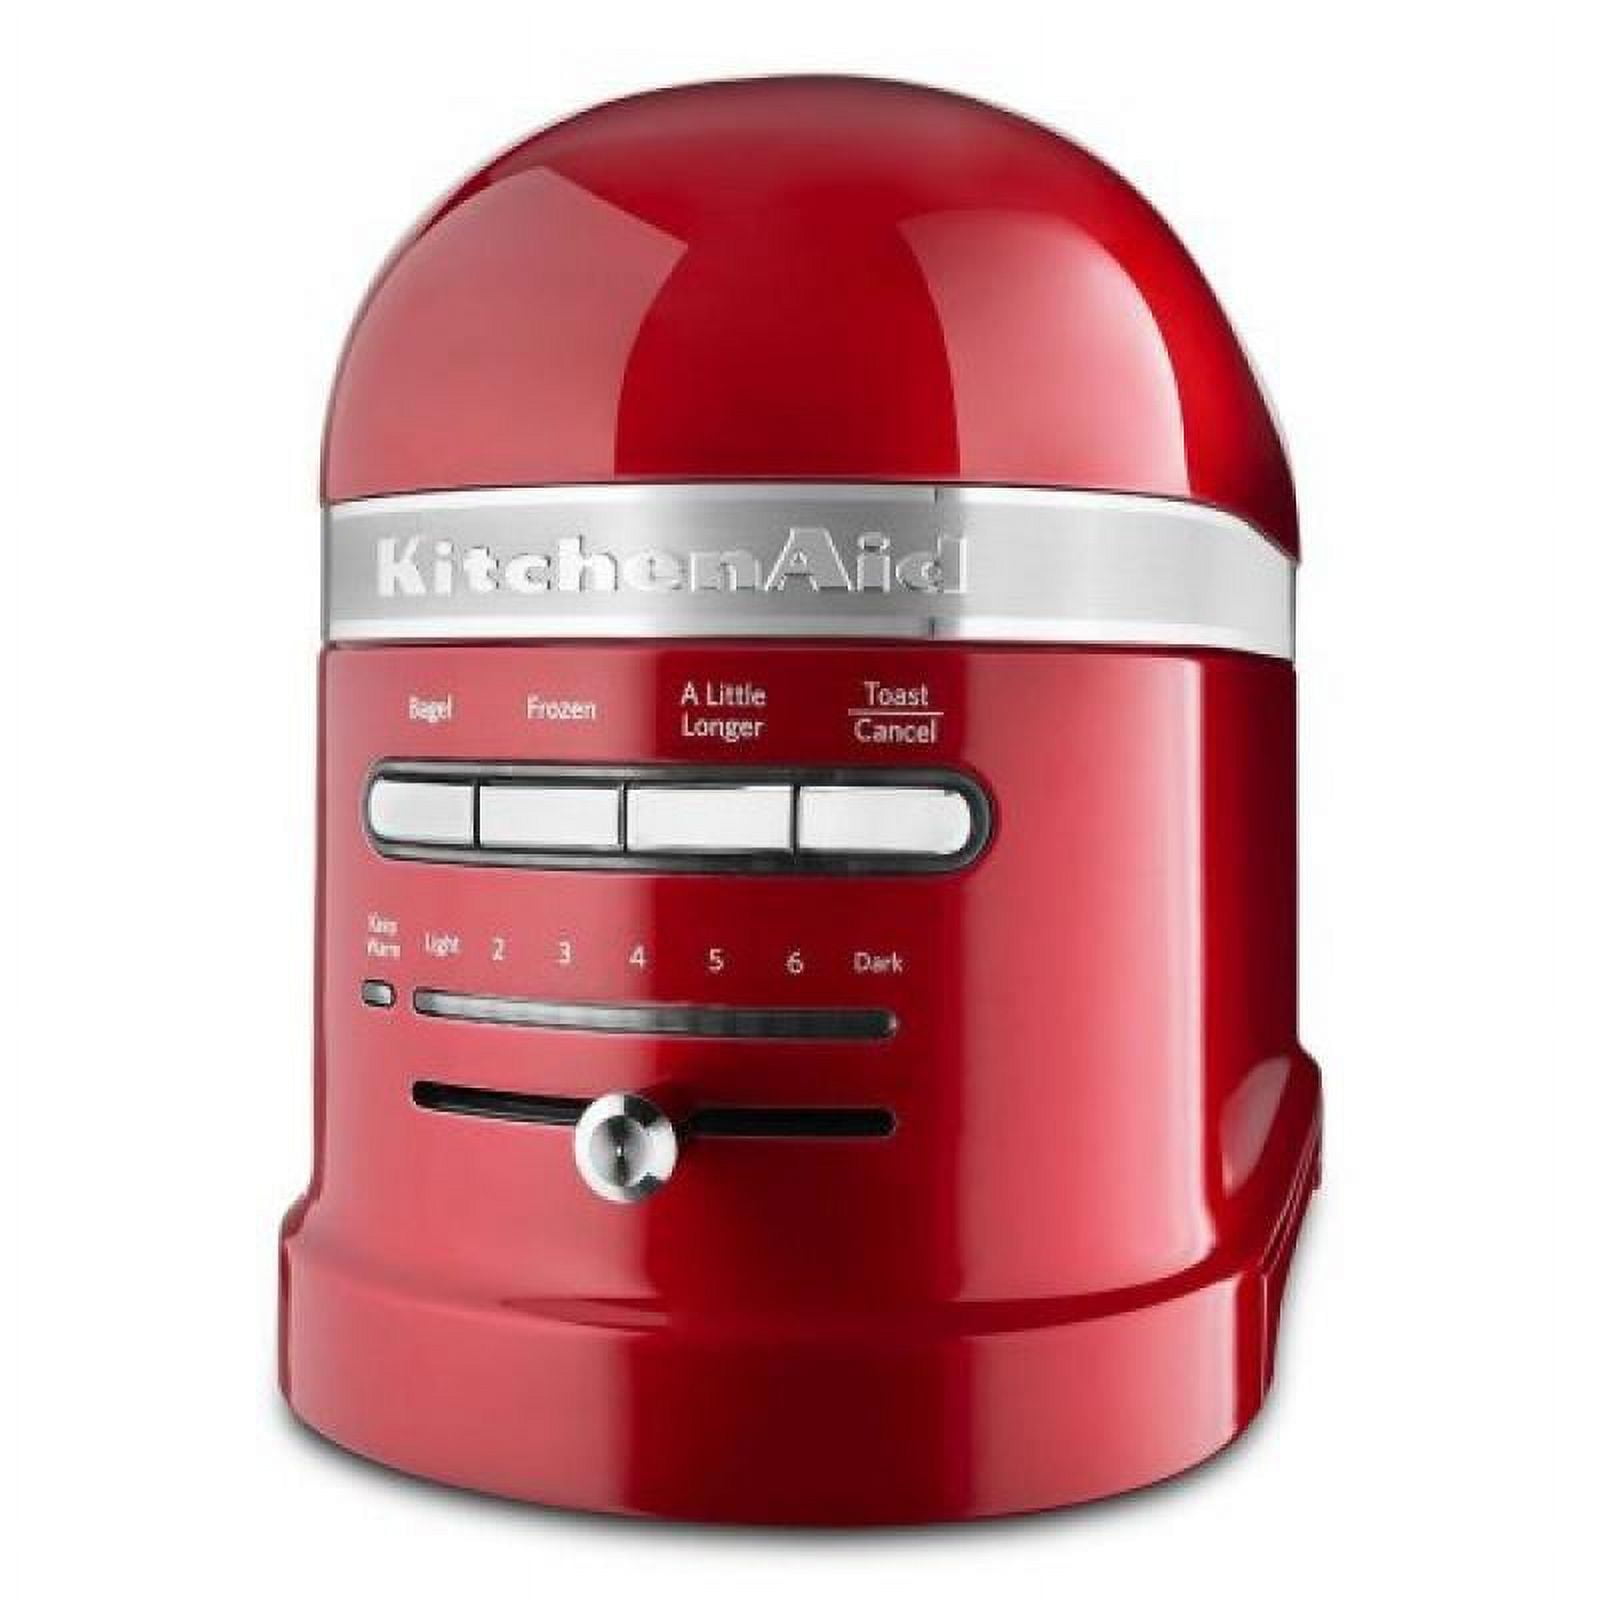 4-slot toaster, 2500W, Candy Apple color - KitchenAid brand